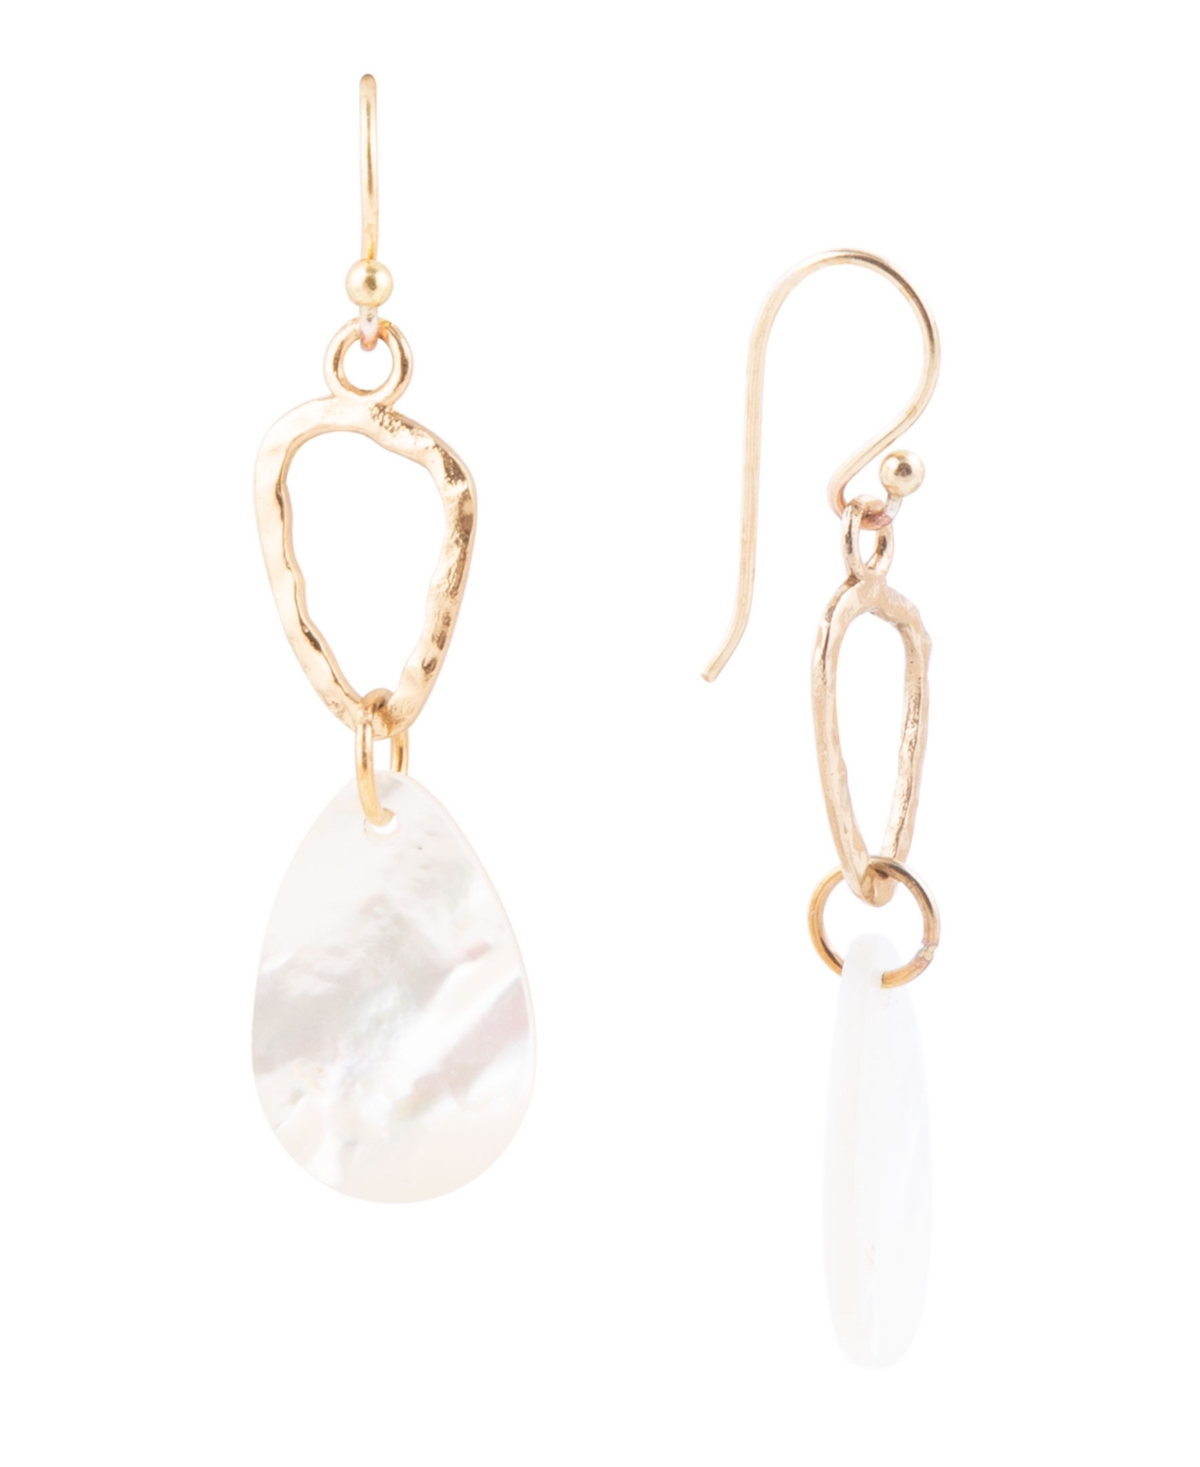 Barse Rose Bronze And Genuine Black Mother-of-pearl Drop Earrings In Genuine Mother-of-pearl